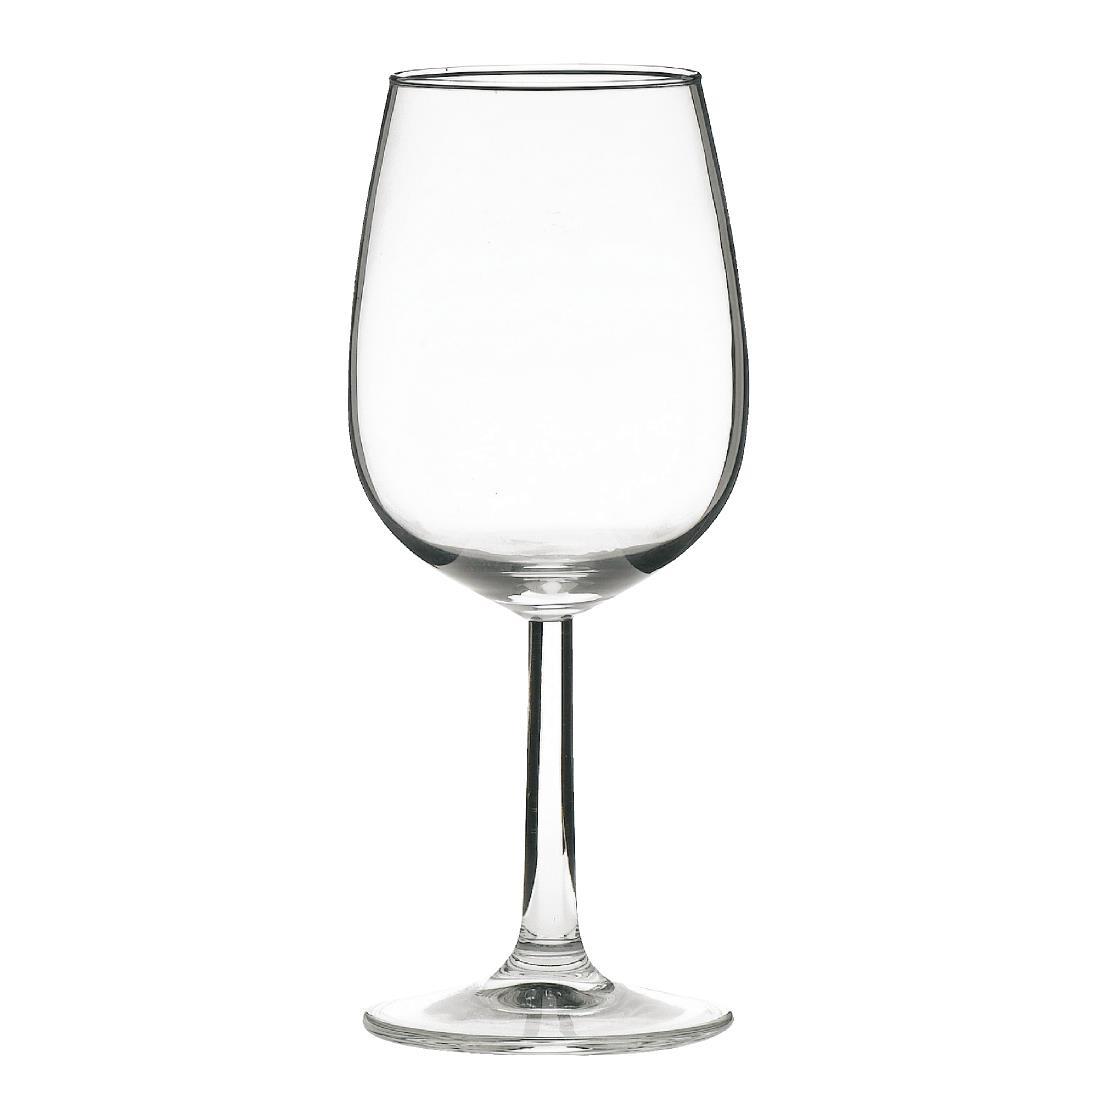 Royal Leerdam Bouquet White Wine Glasses 230ml (Pack of 12) - CT071  - 1